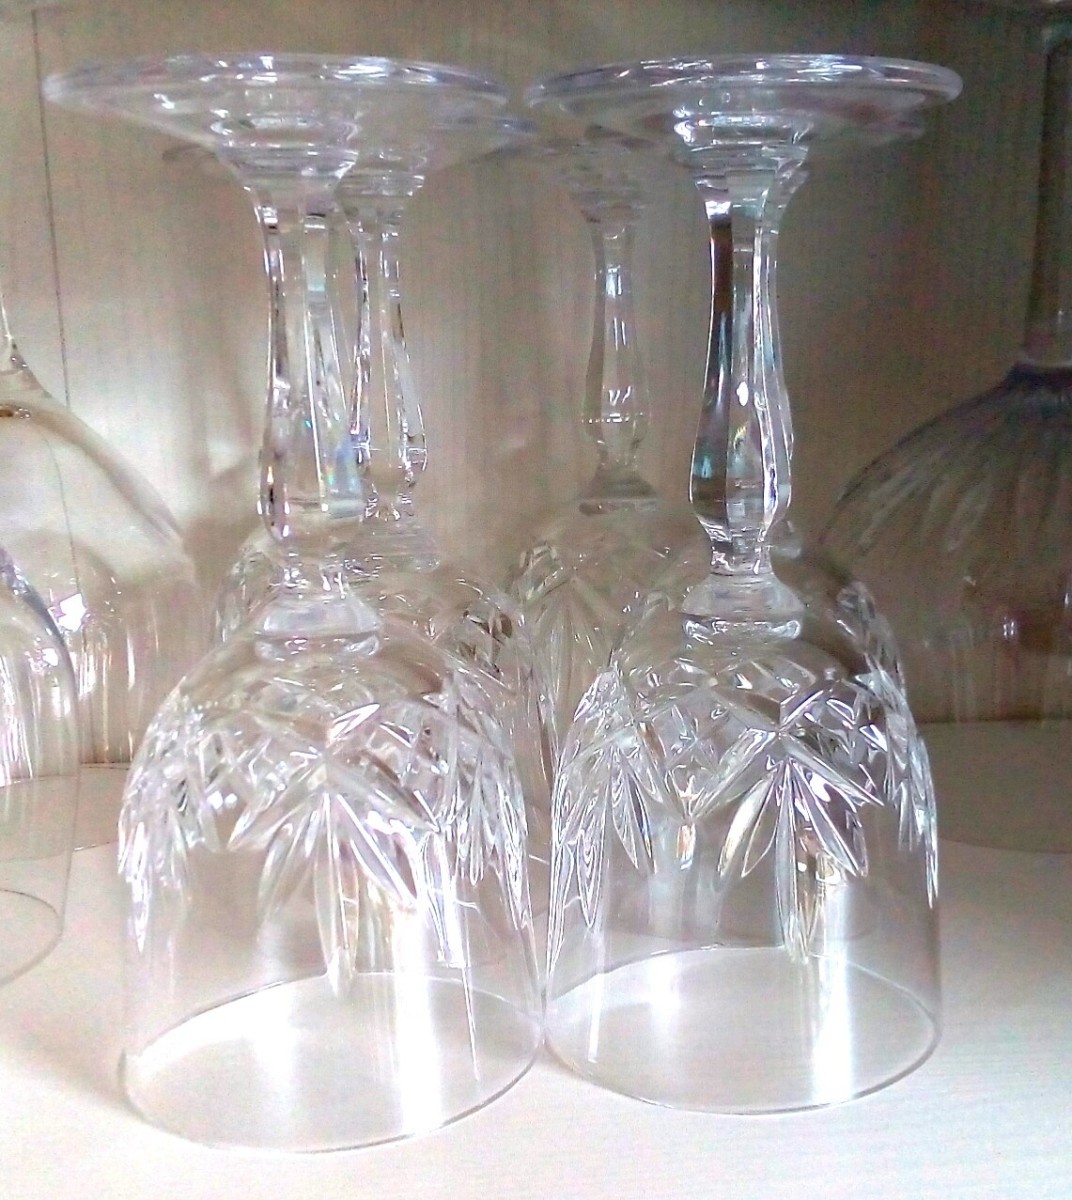 Waterford Cut Glass Crystal Is Made Where Now?